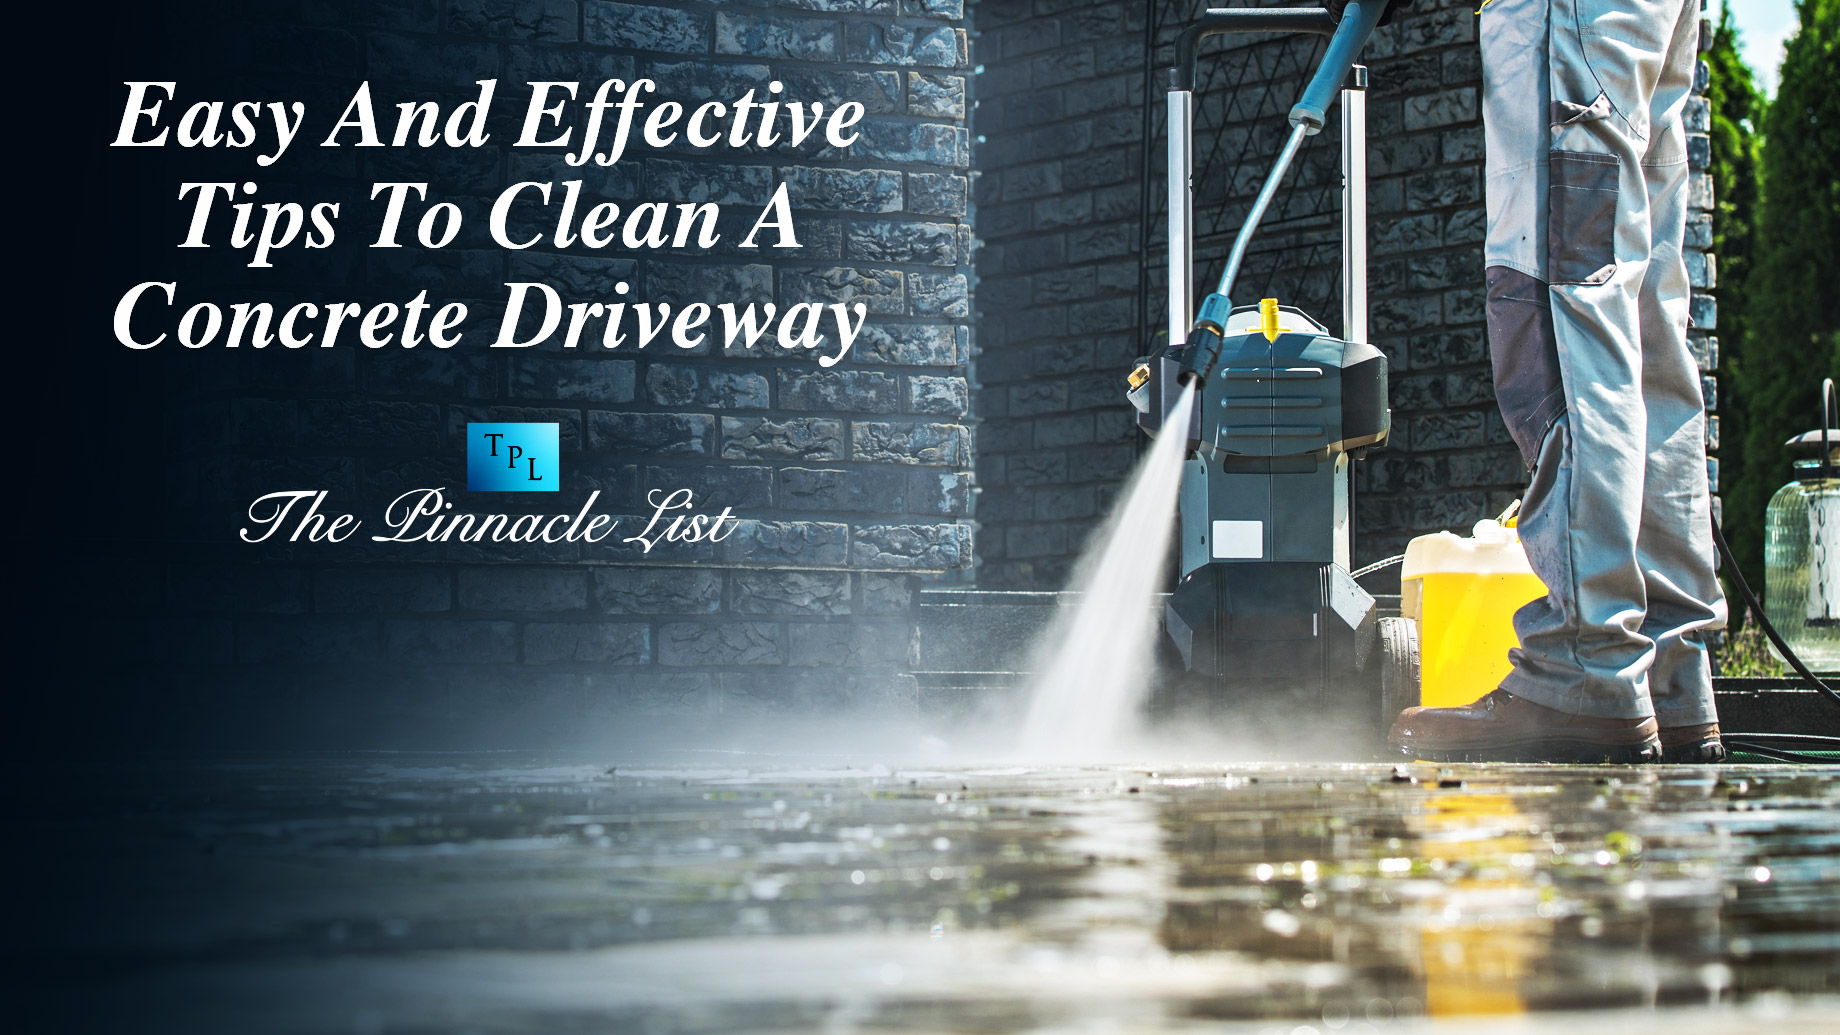 Easy And Effective Tips To Clean A Concrete Driveway